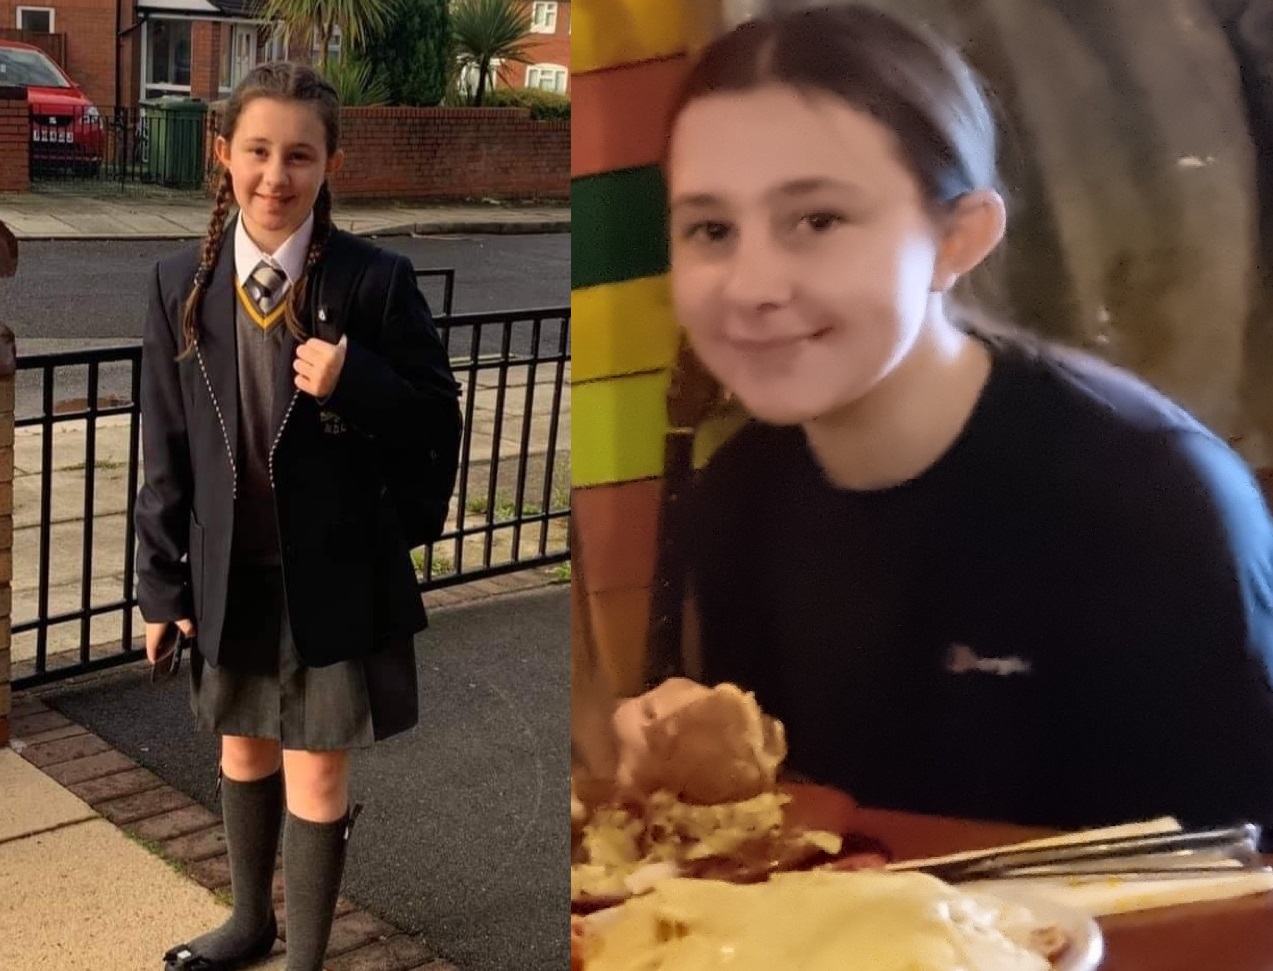 UK NEWS | 14-year-old boy charged with the murder of 12-year-old girl Ava White in Liverpool